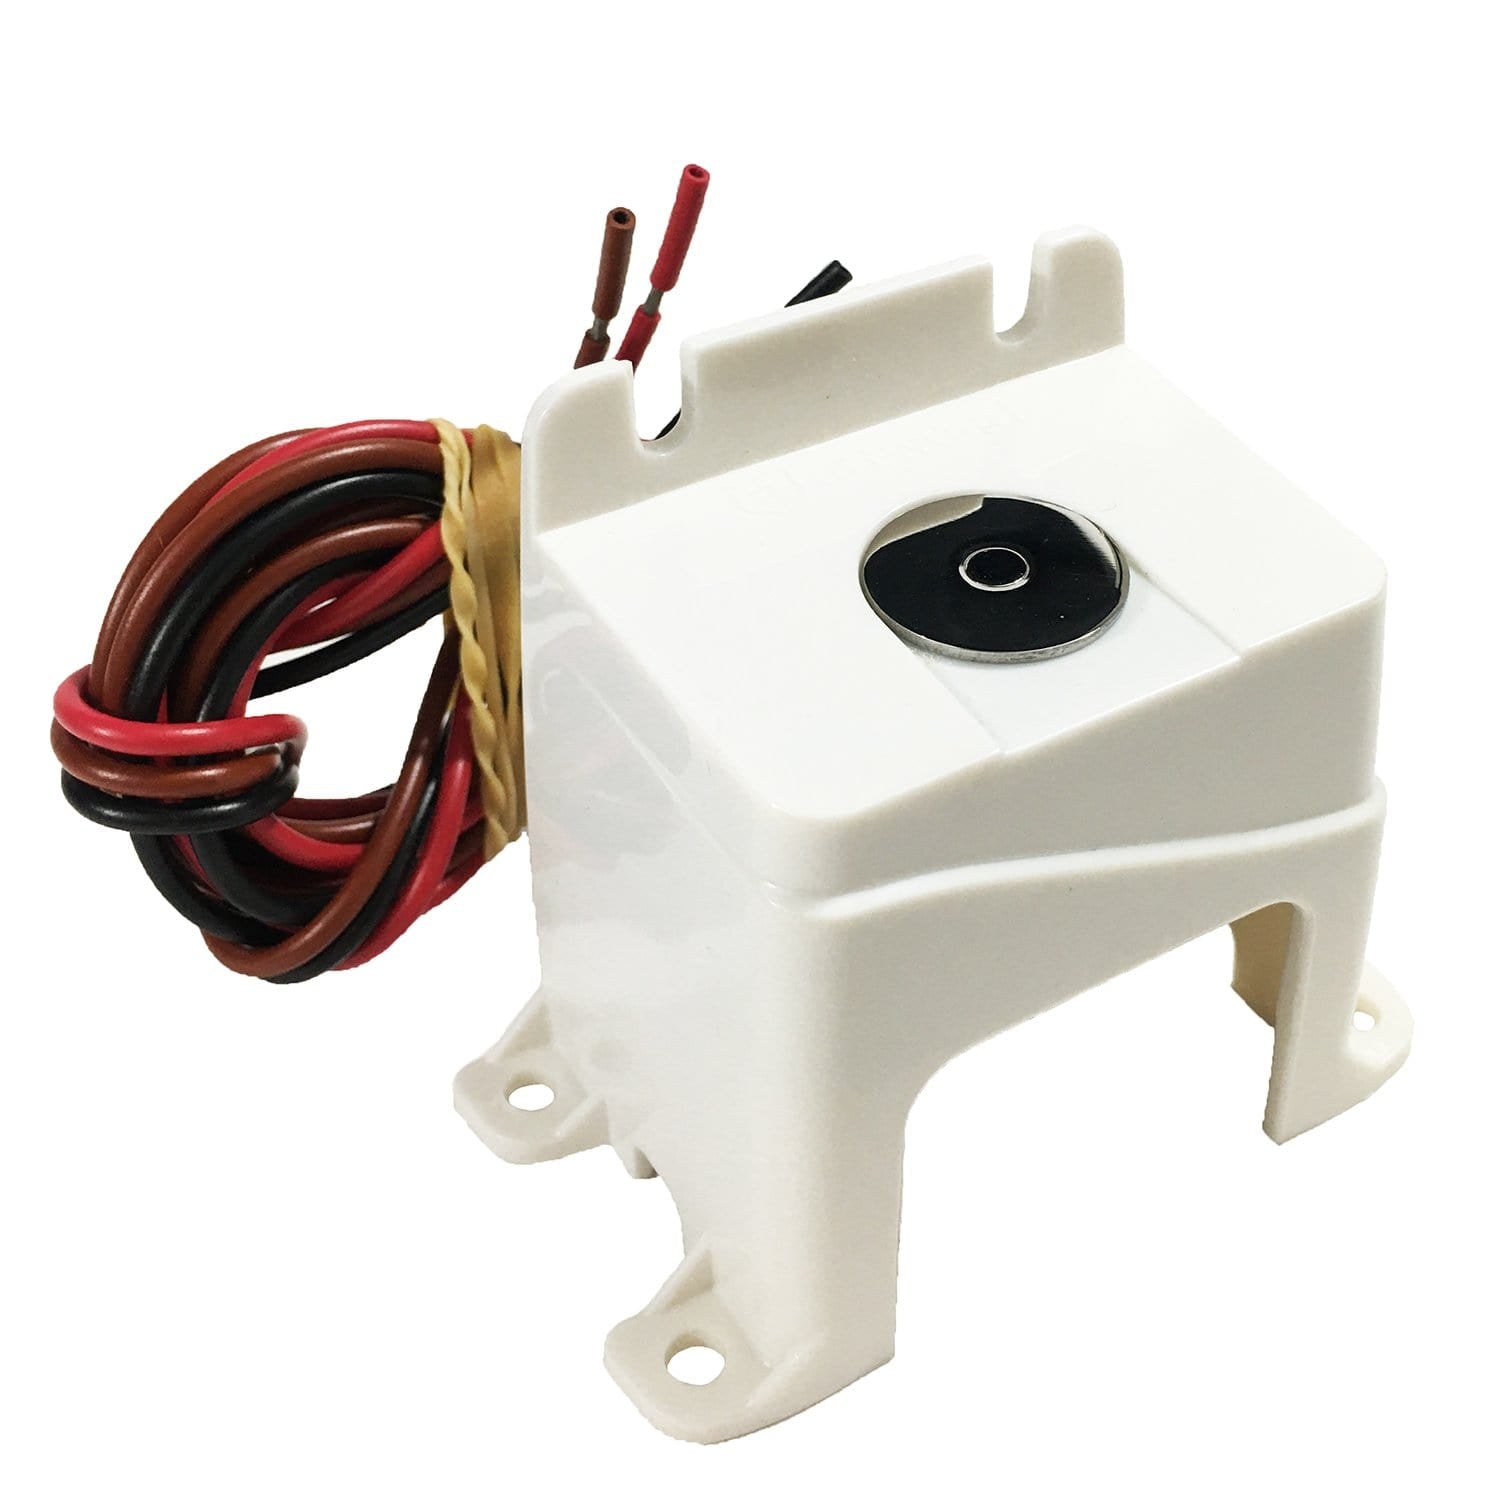 Attwood 4801-1 Automatic Bilge Pump Float Switch W/ Cover White